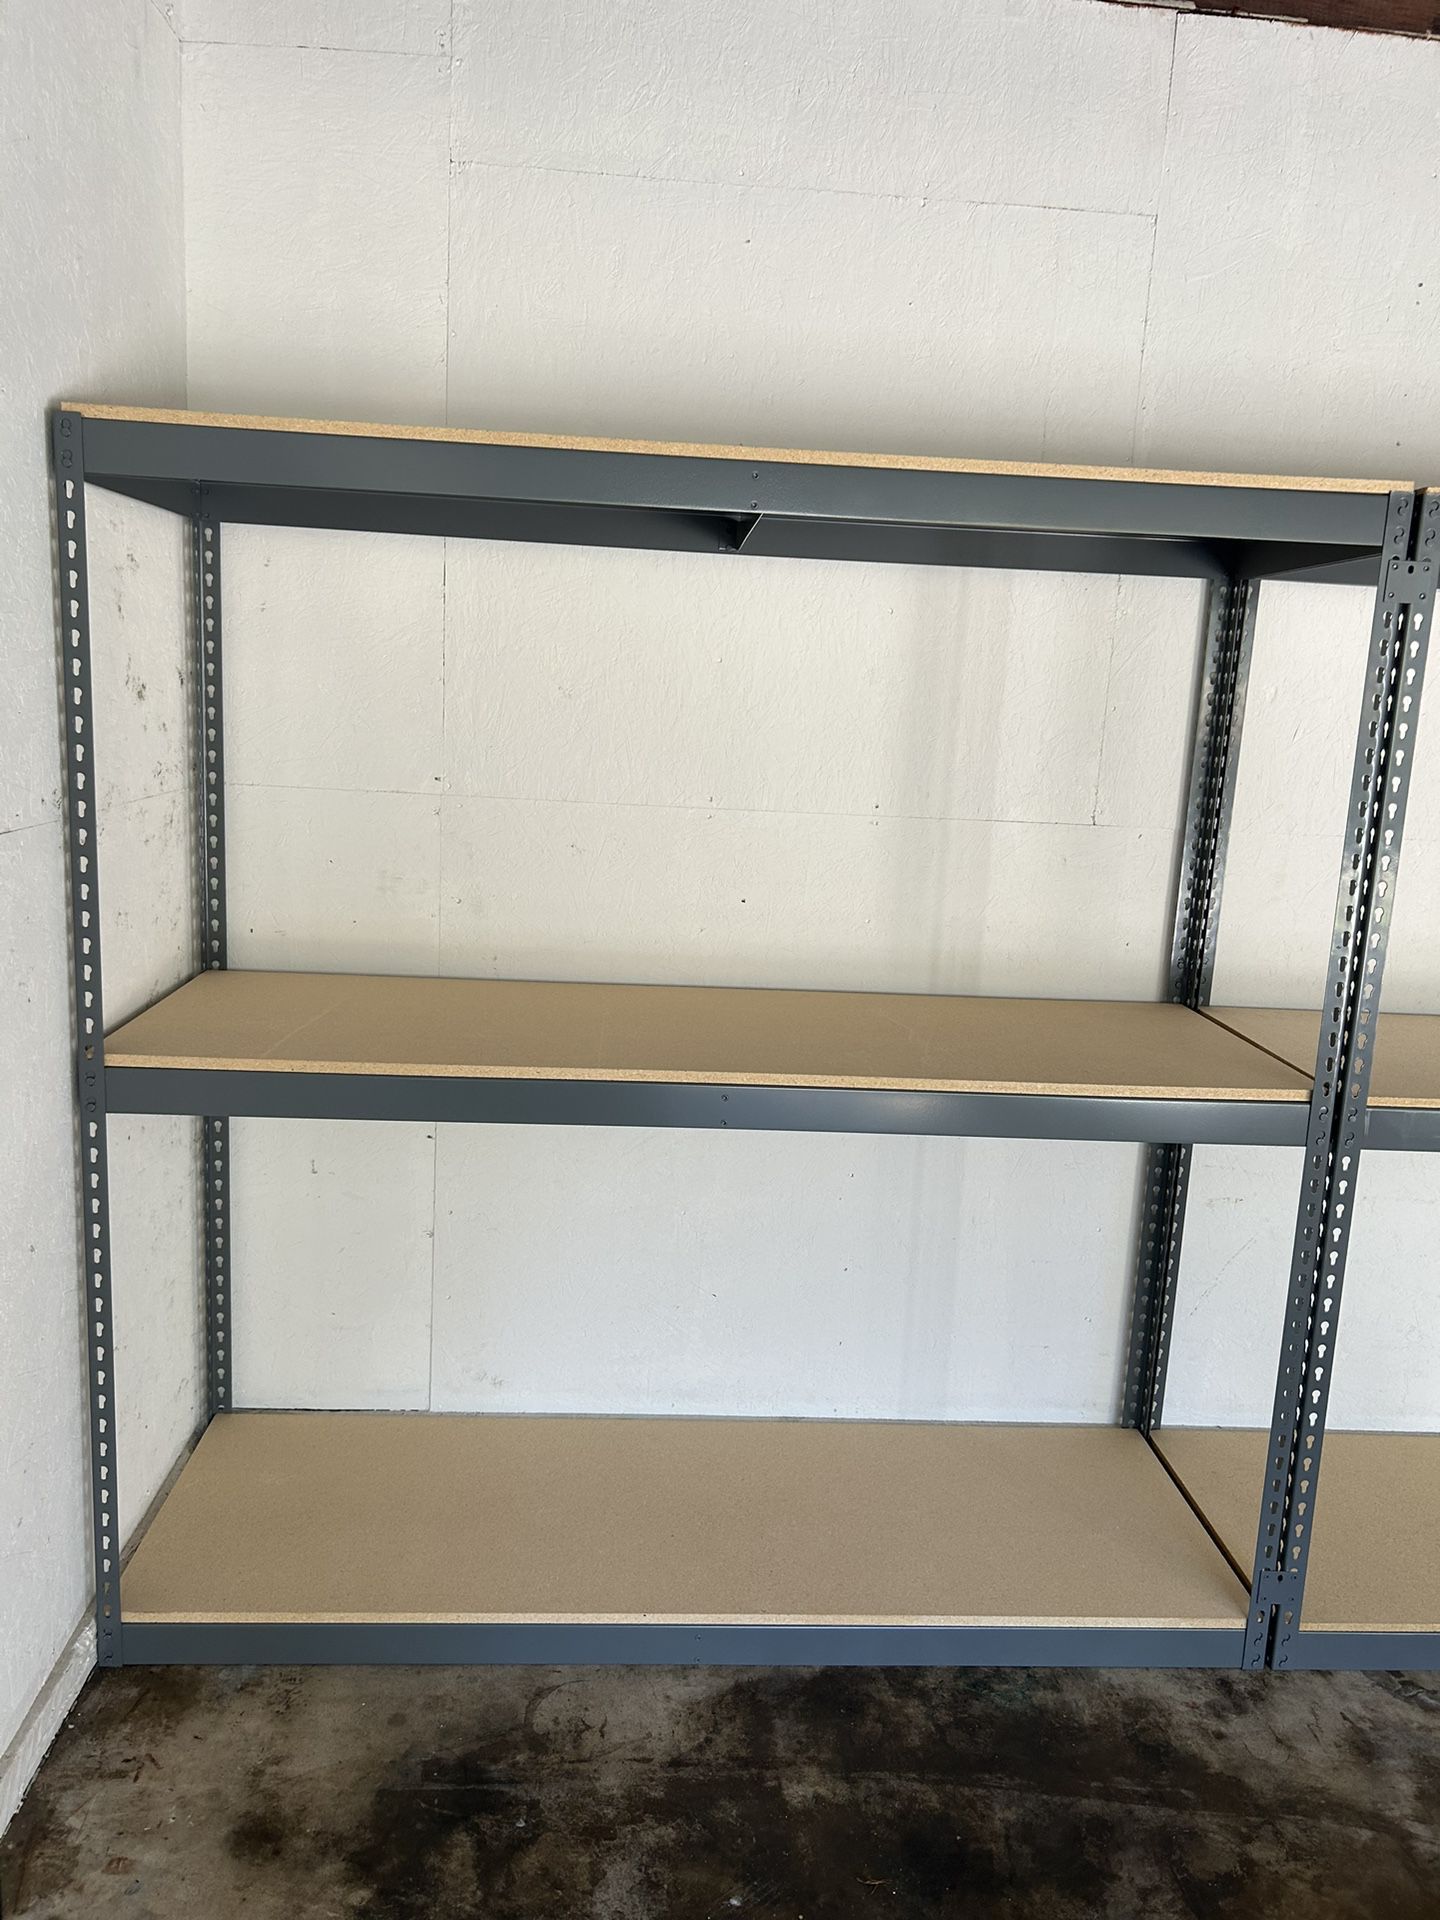 Garage Shelving 72 in W x 24 in D Boltless Shed Storage Shelves Heavy Duty Stronger than Homedepot & Lowes Racks Delivery Available